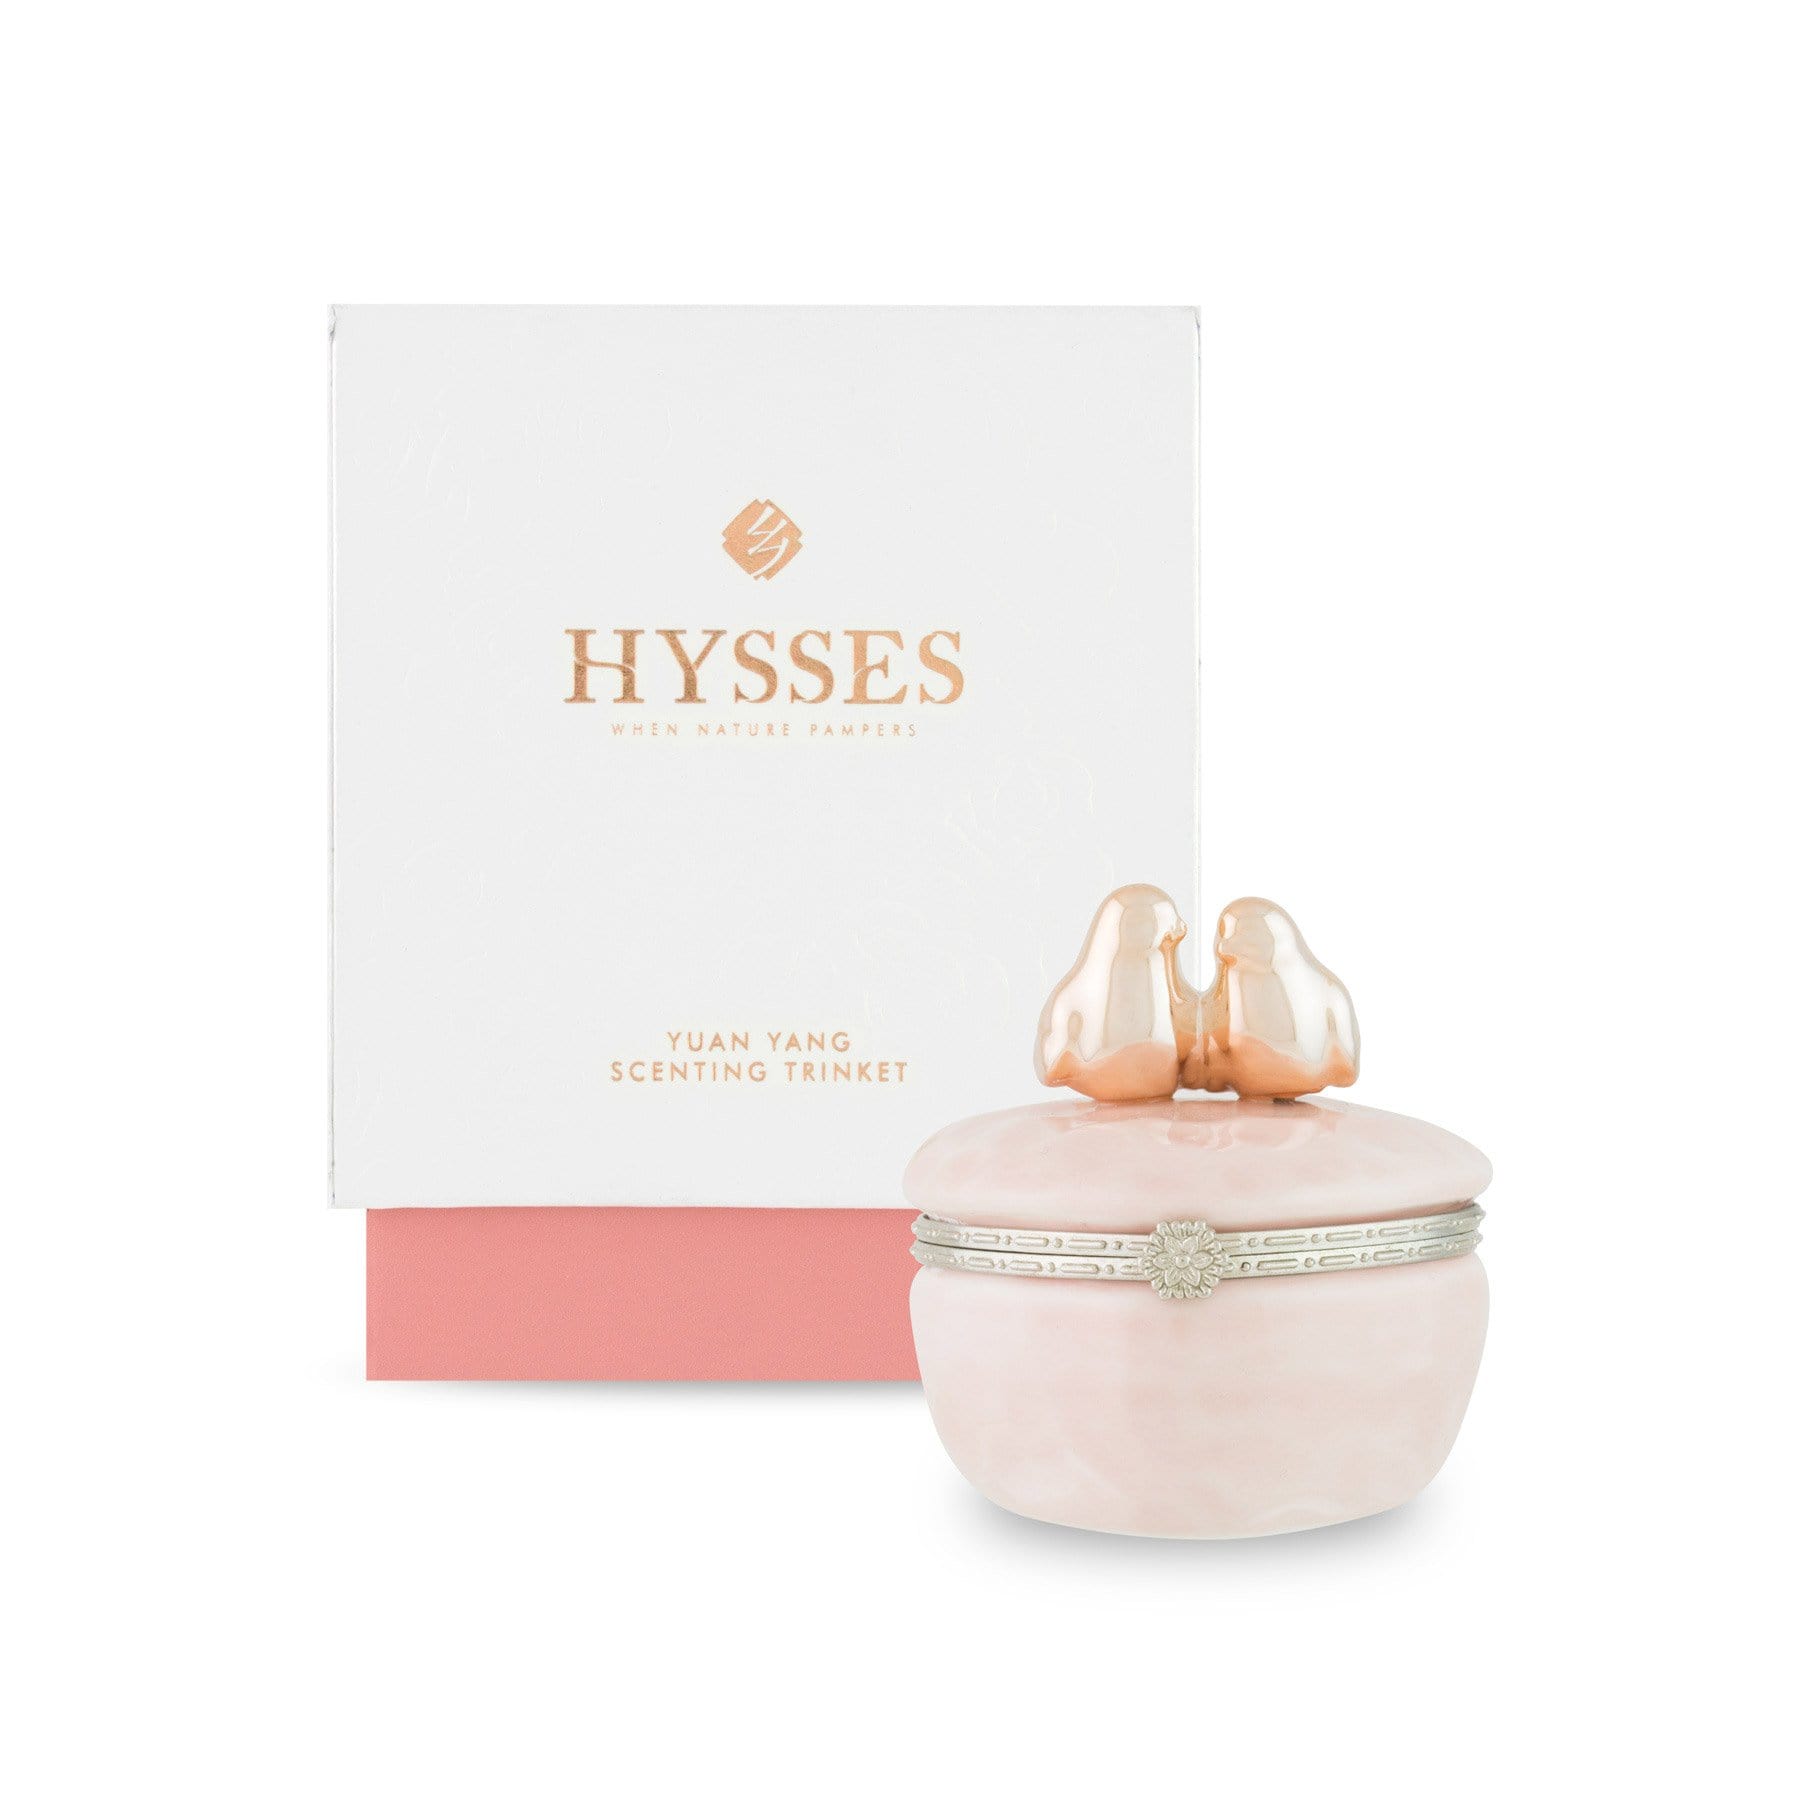 Hysses Home Scents Yuan Yang Scenting Clay Trinket